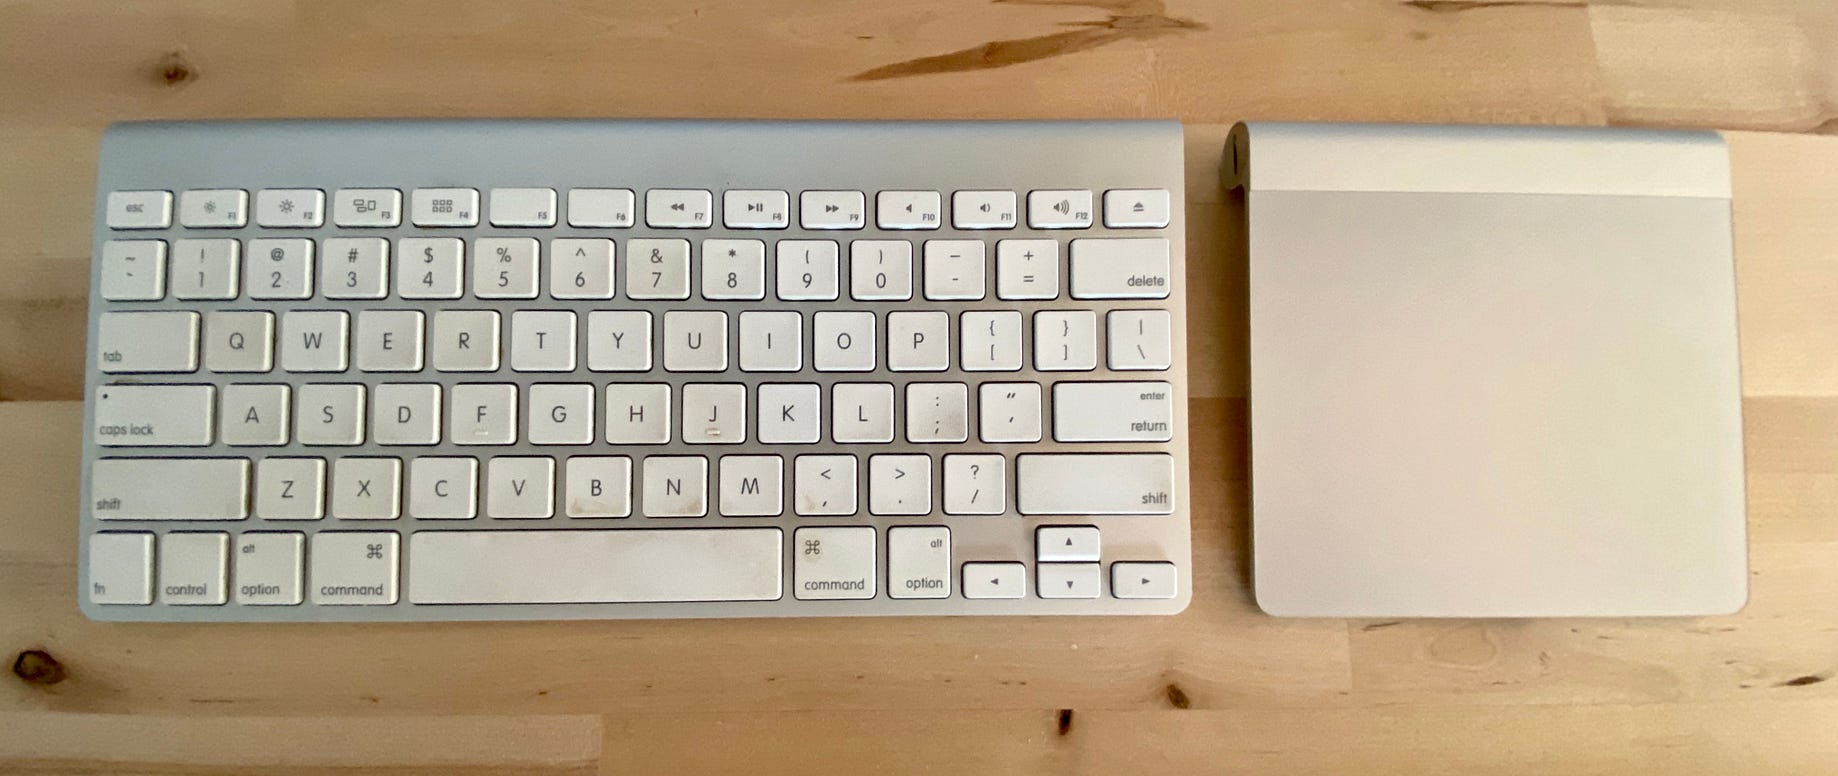 Apple wireless keyboard and mouse/trackpad problems | by Emre | Mac O'Clock  | Medium